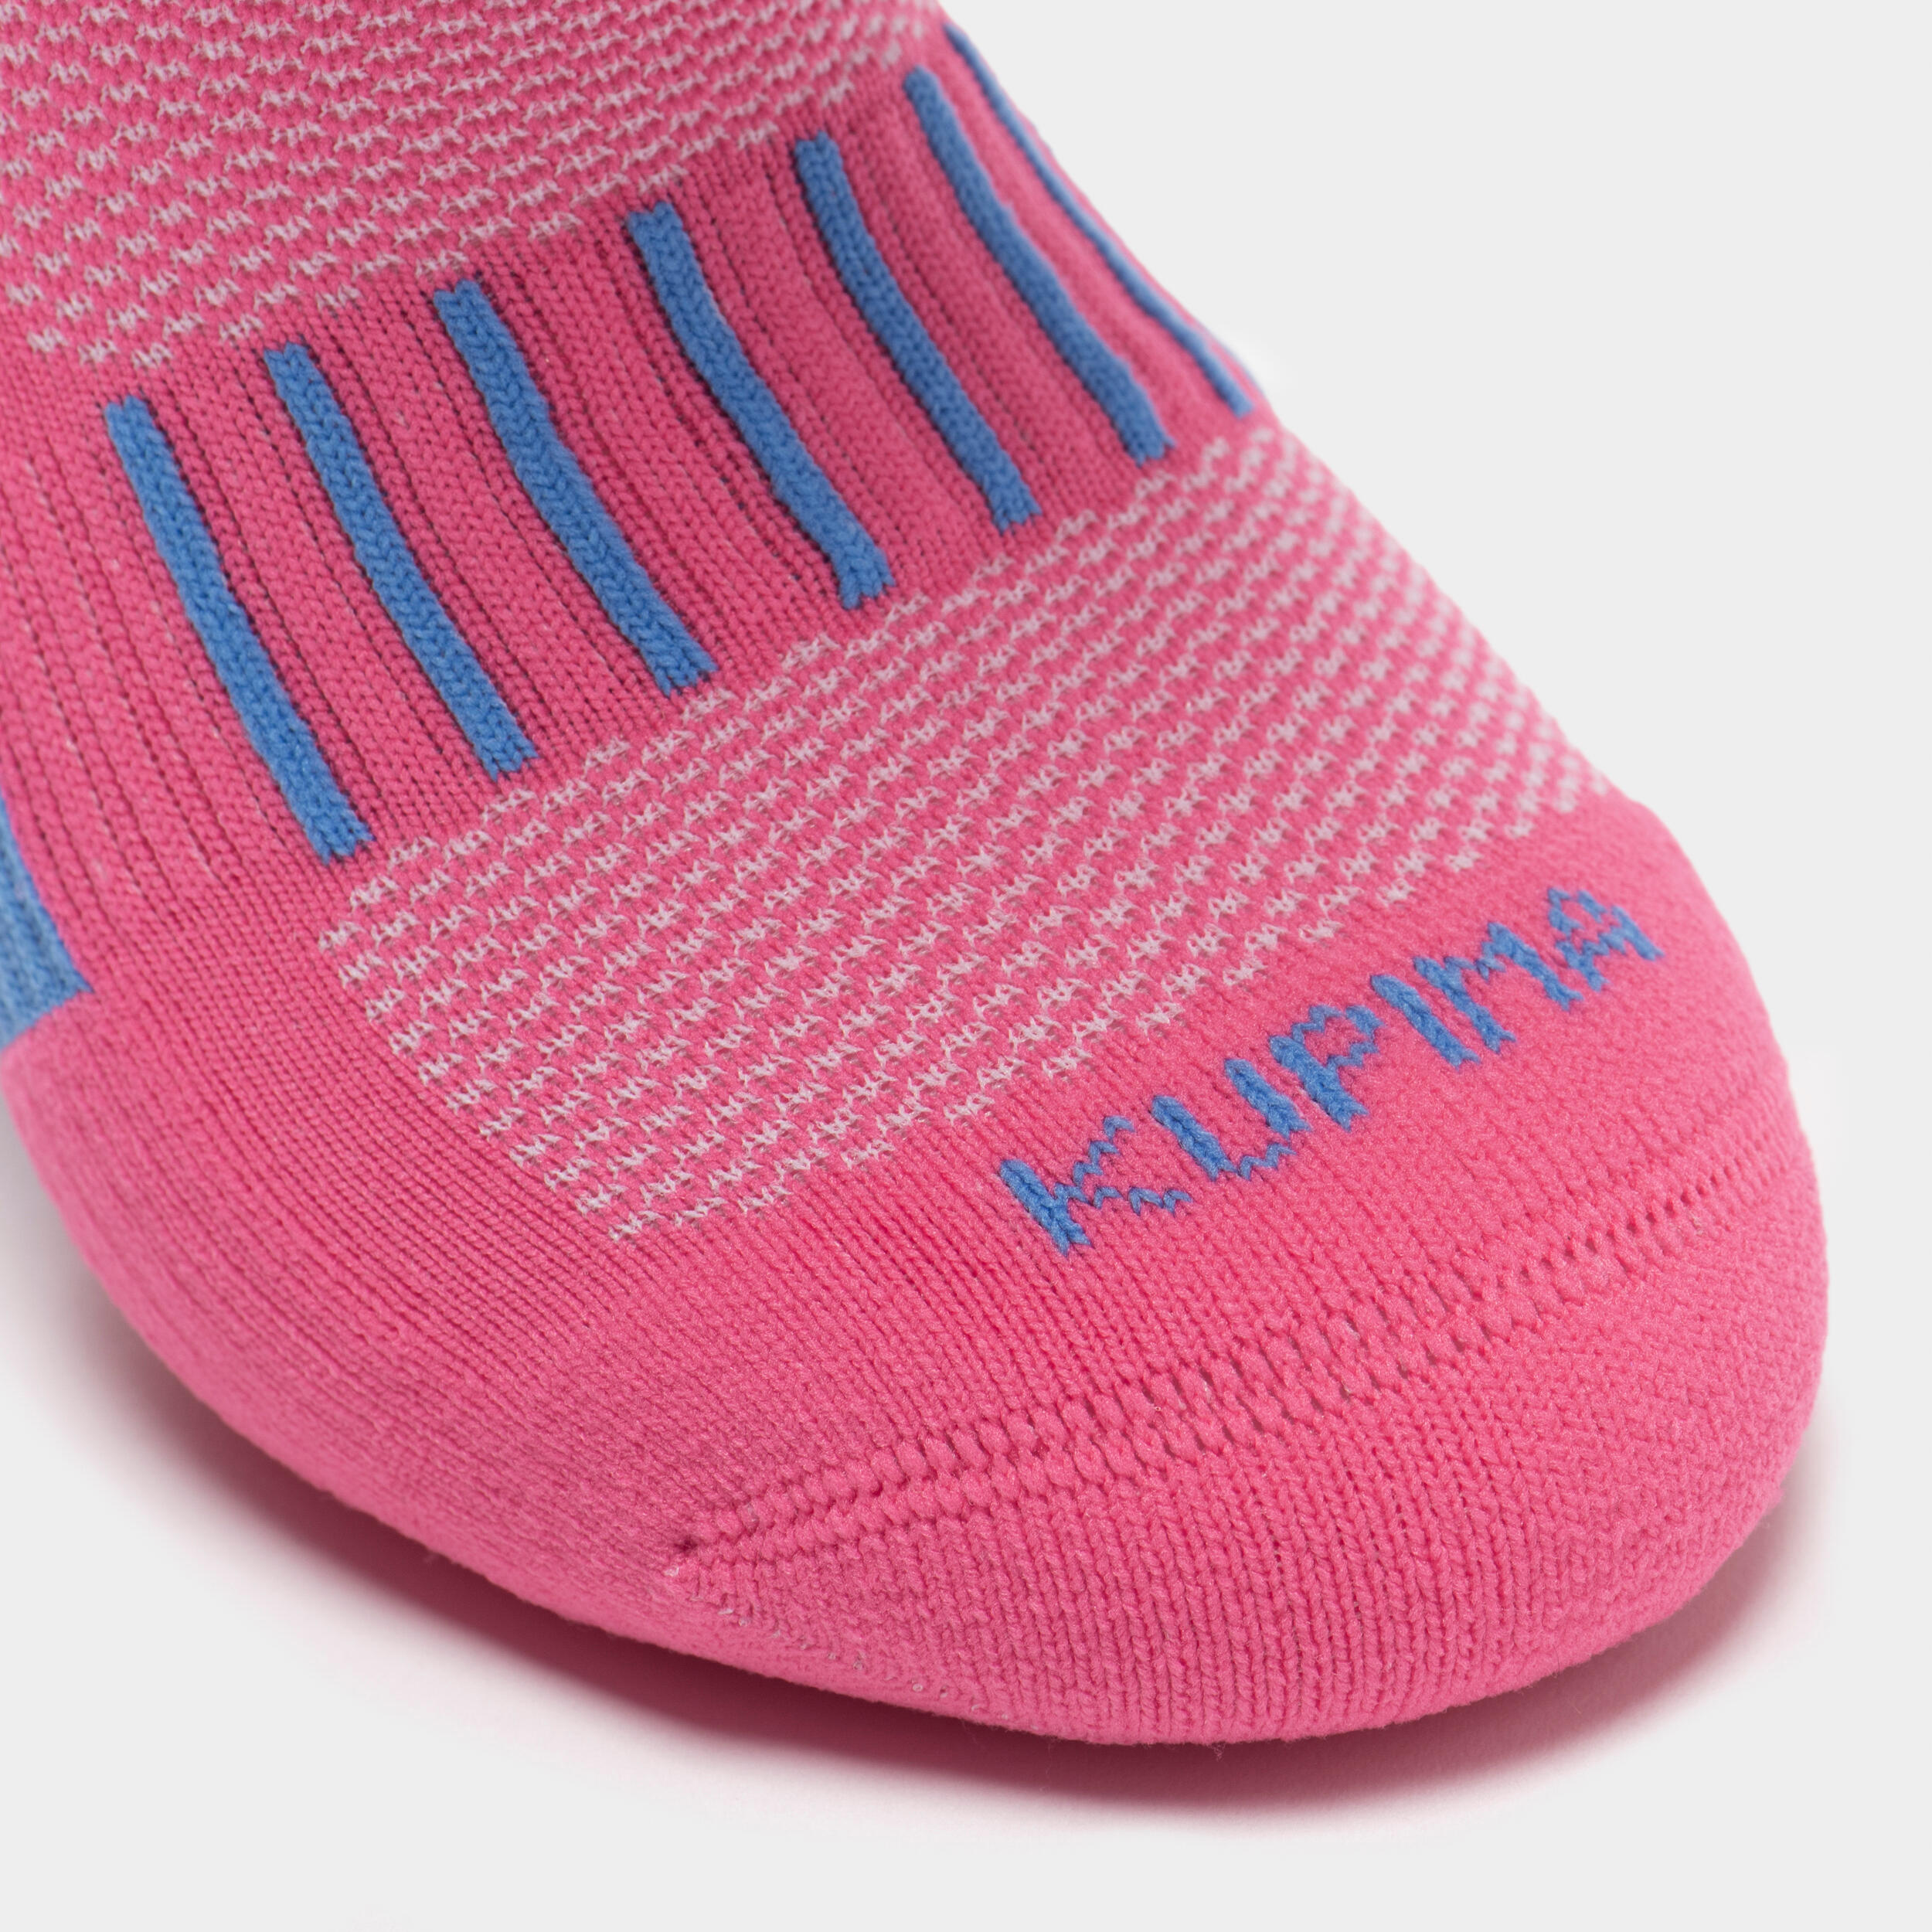 Kids' Socks AT 500 Mid 2-Pack - Plain Pink and White Pink Blue Stripes 11/13